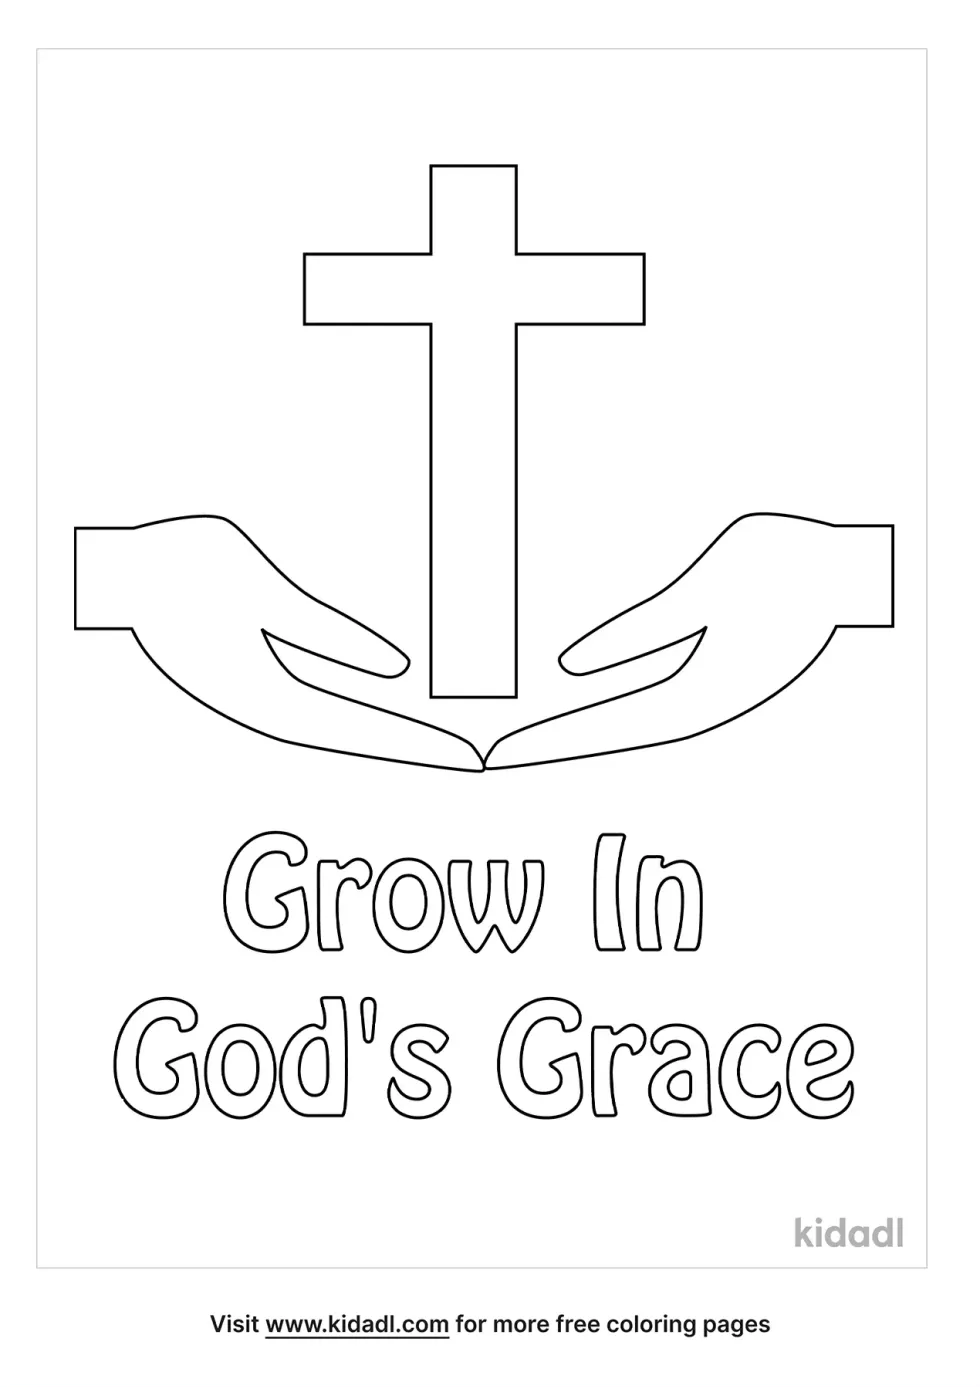 About God's Grace Coloring Page